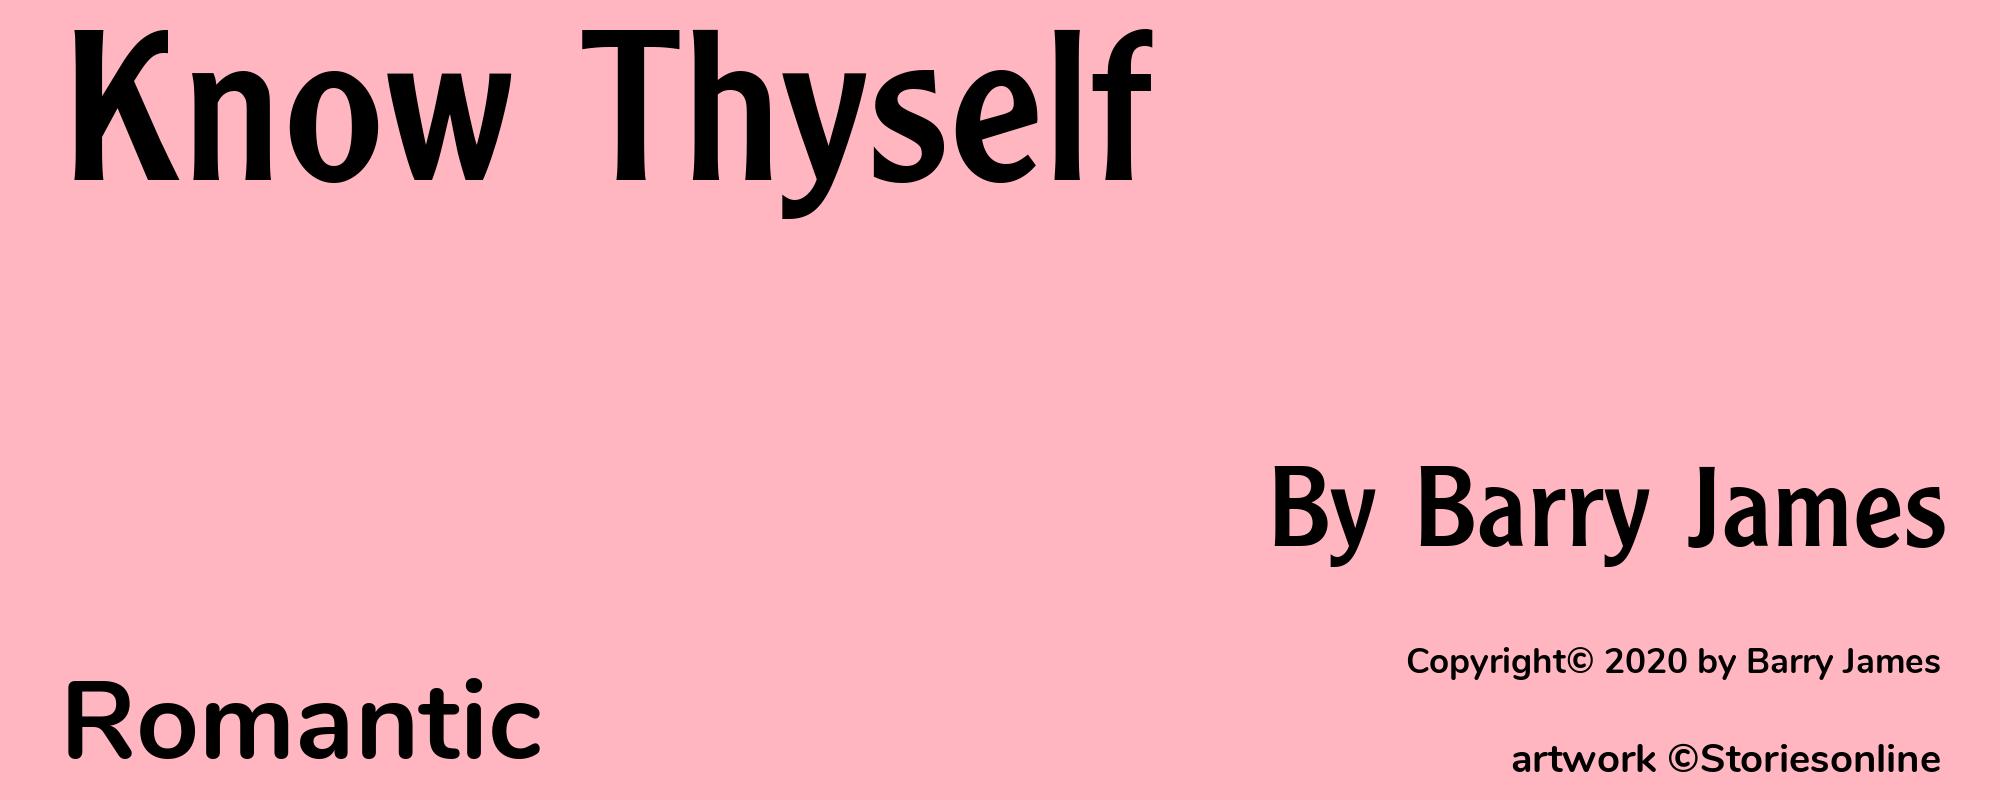 Know Thyself - Cover